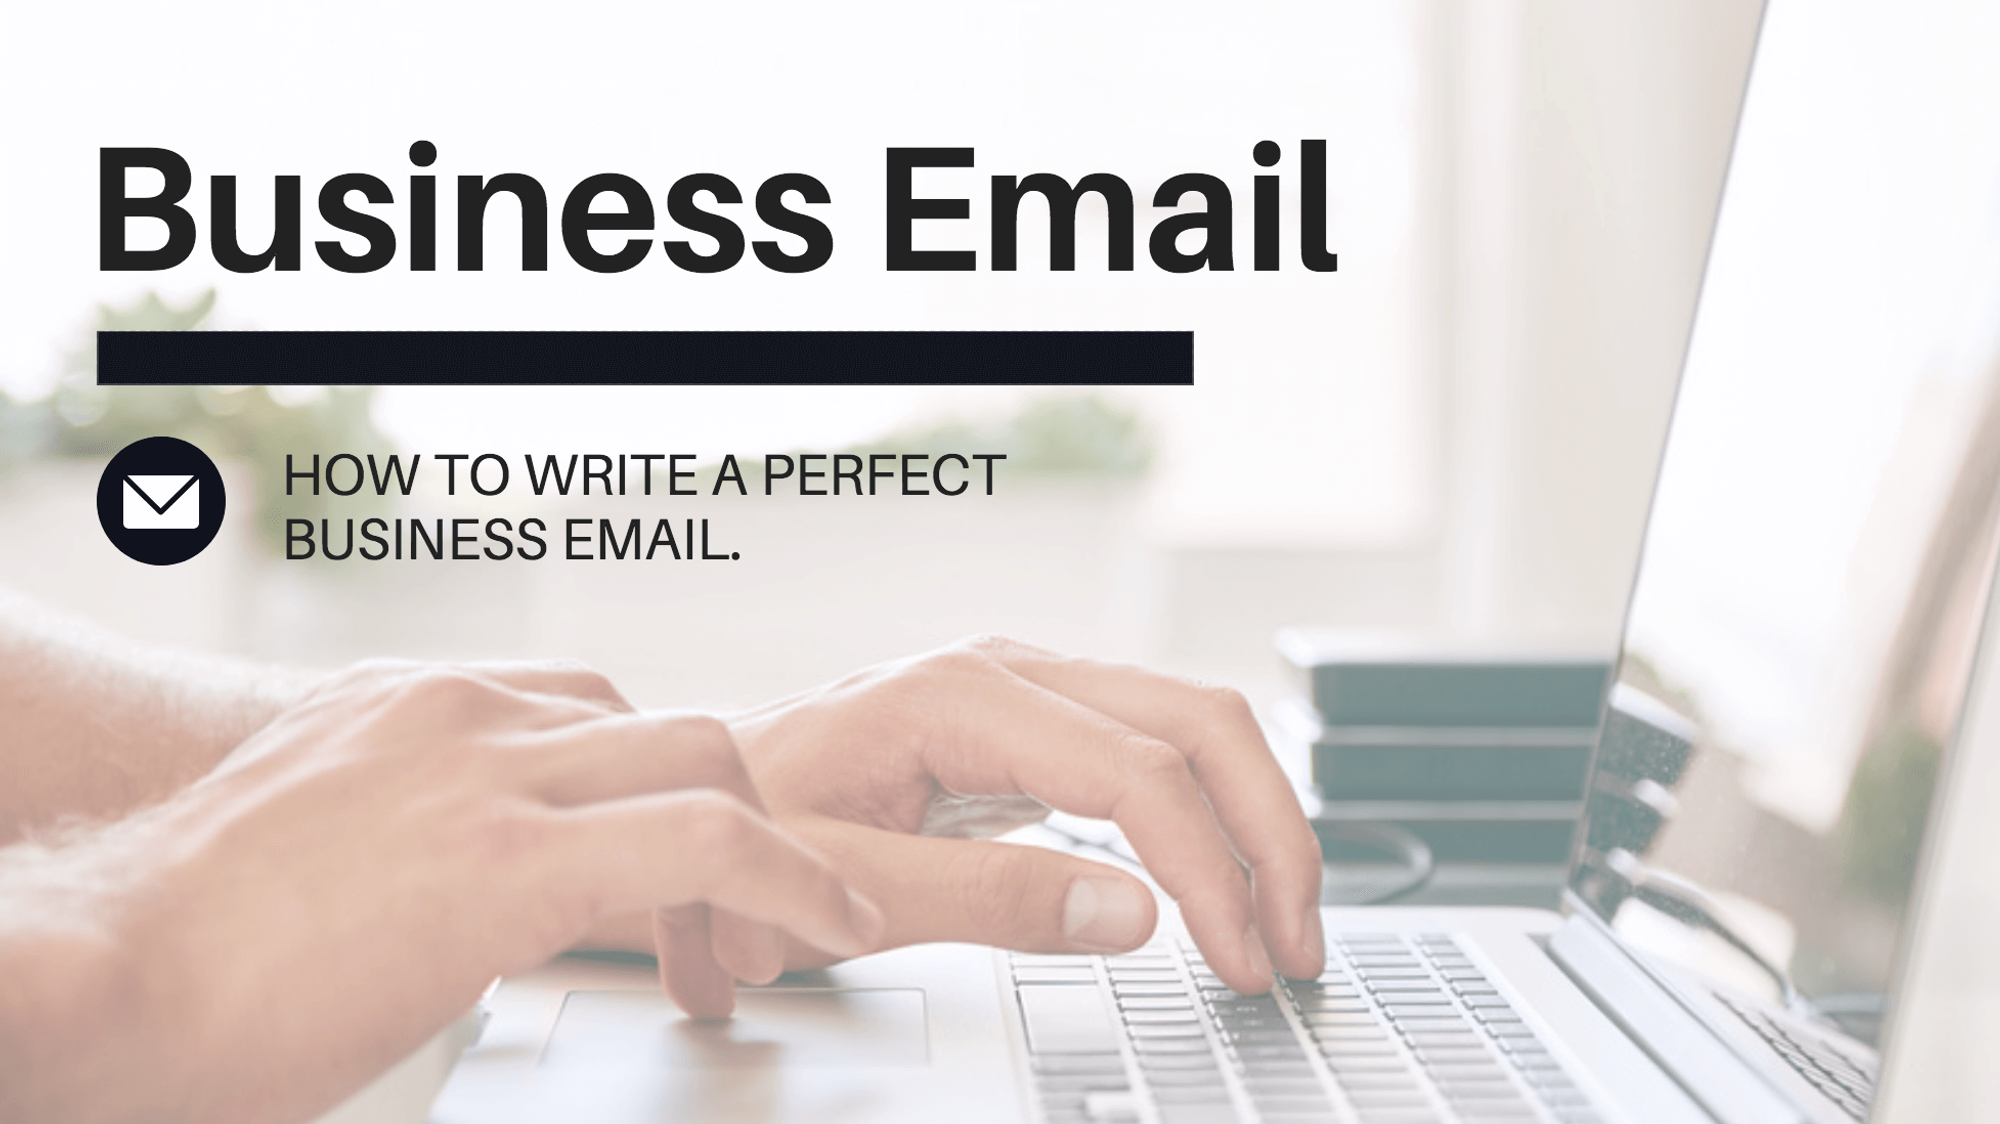 How to Write a Business Email (Updated for 2020)